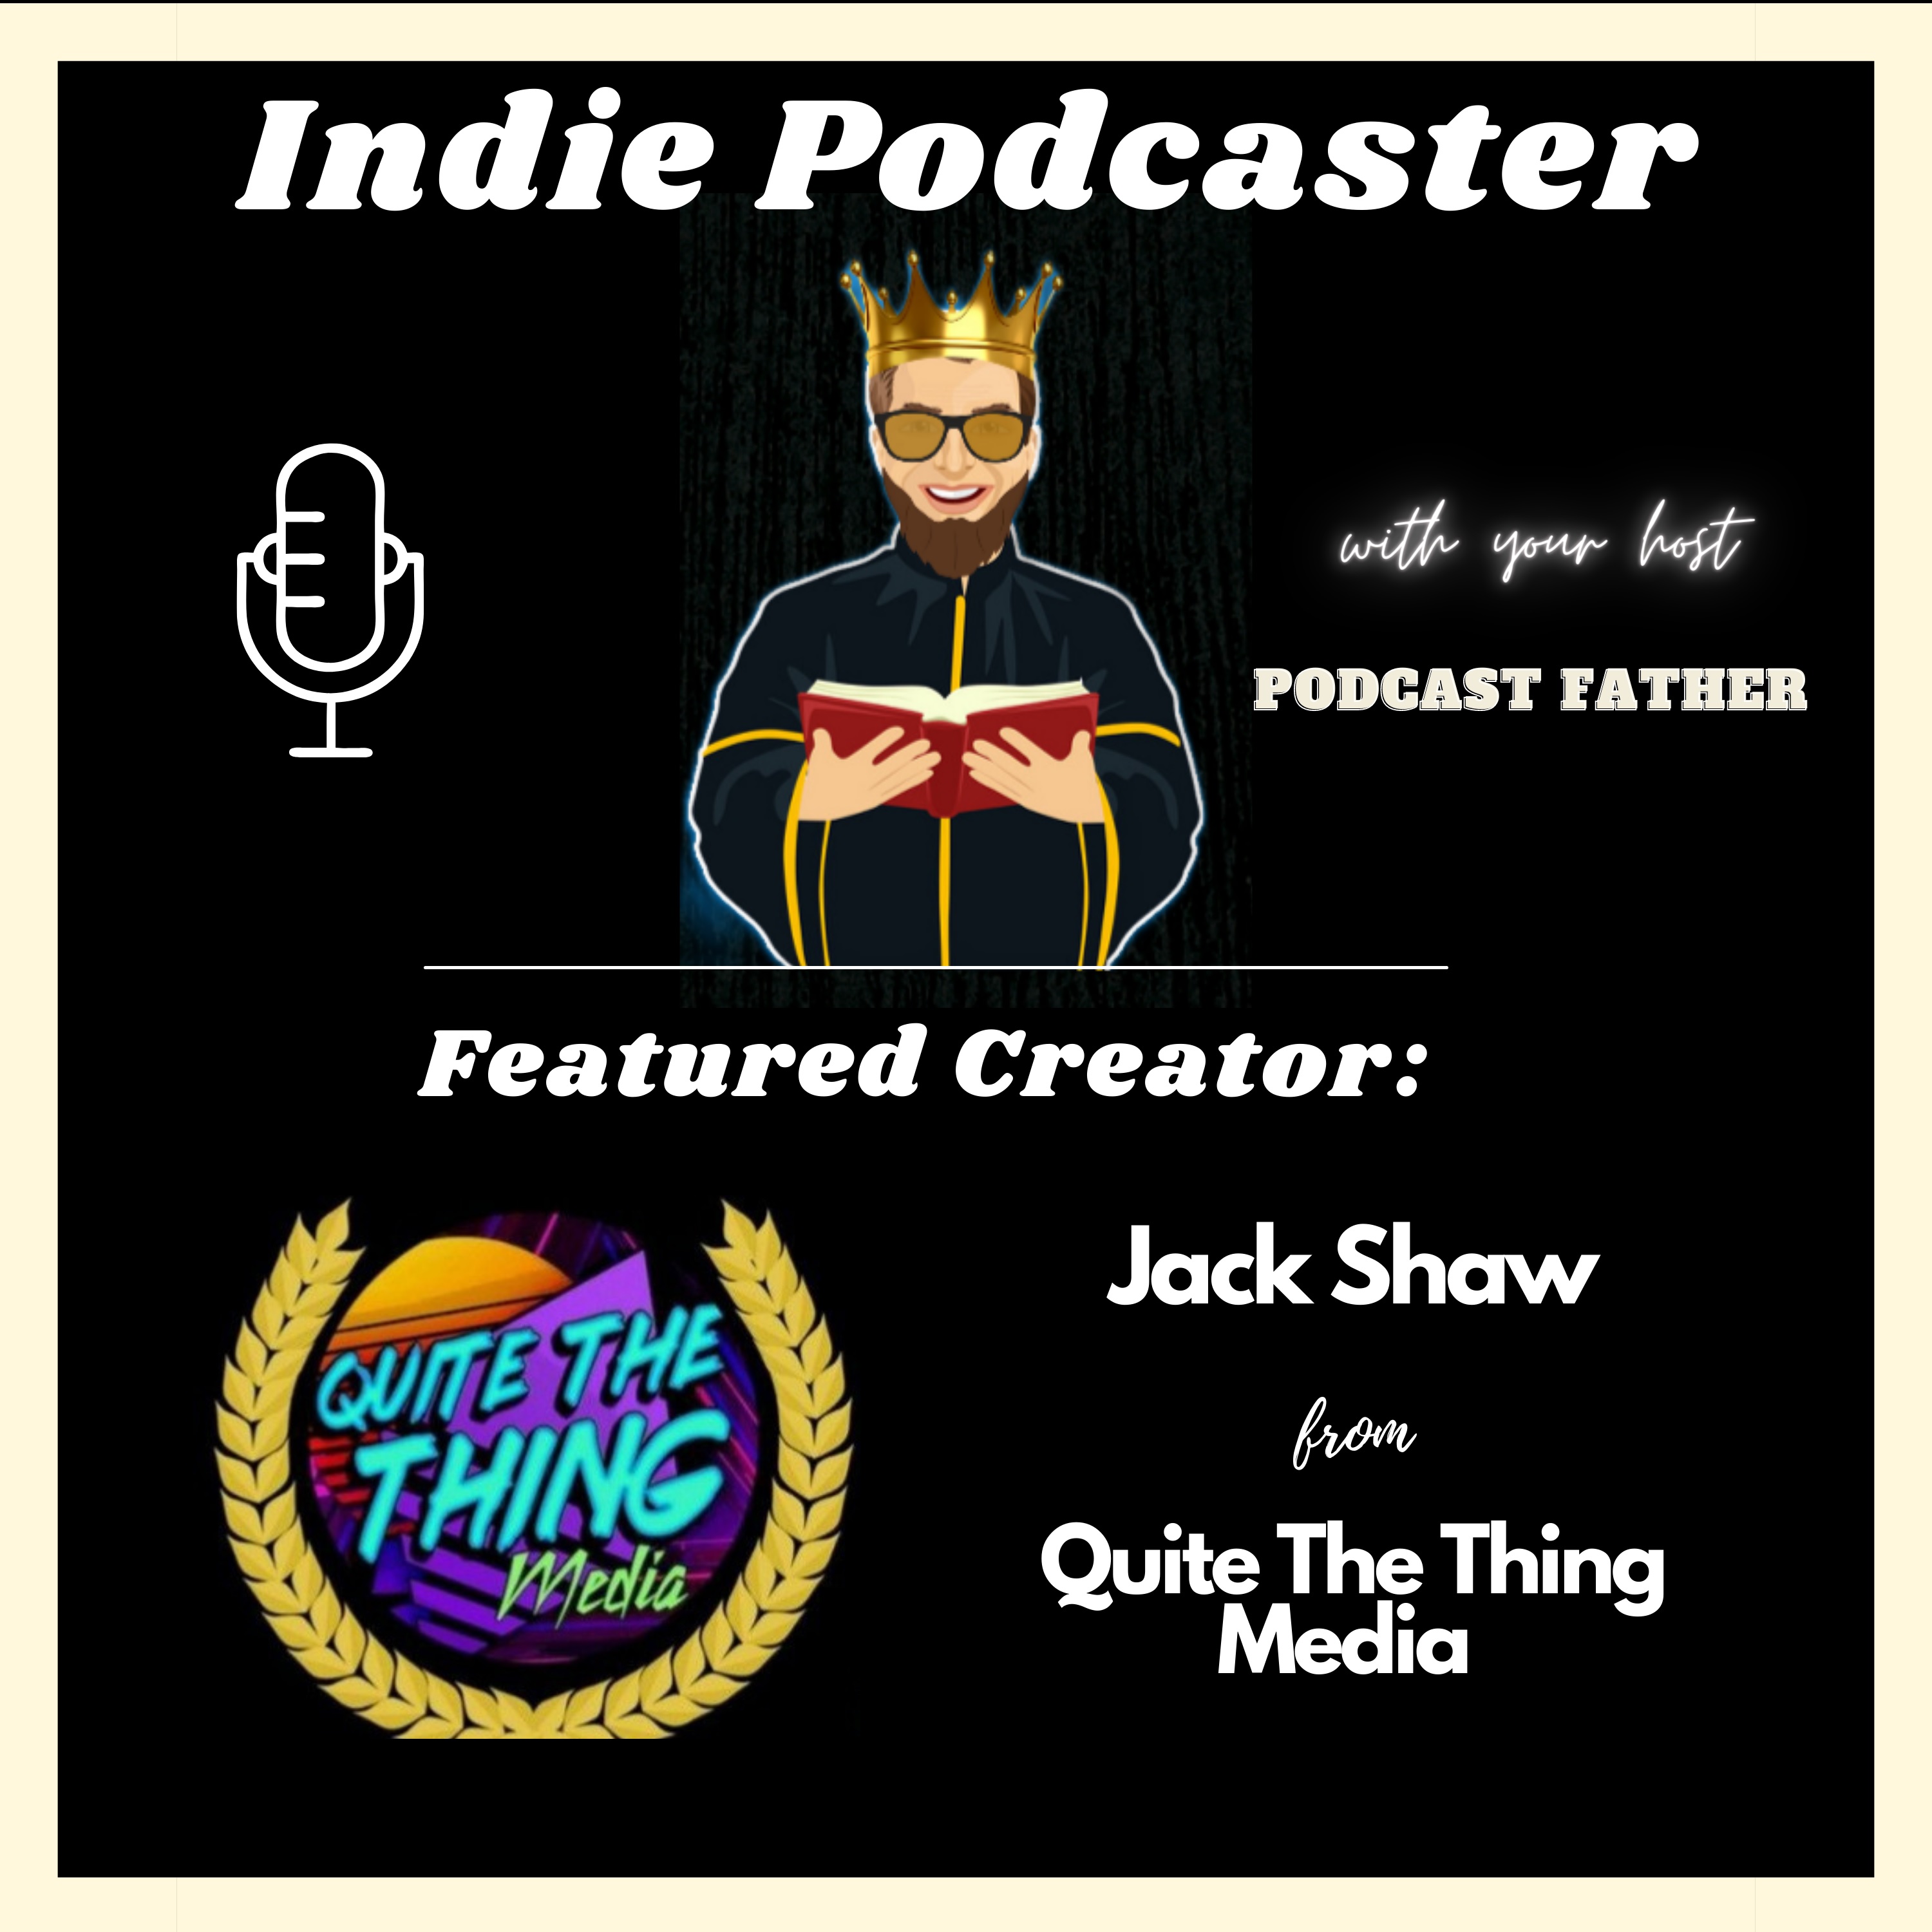 Jack Shaw from Quite The Thing Media Image